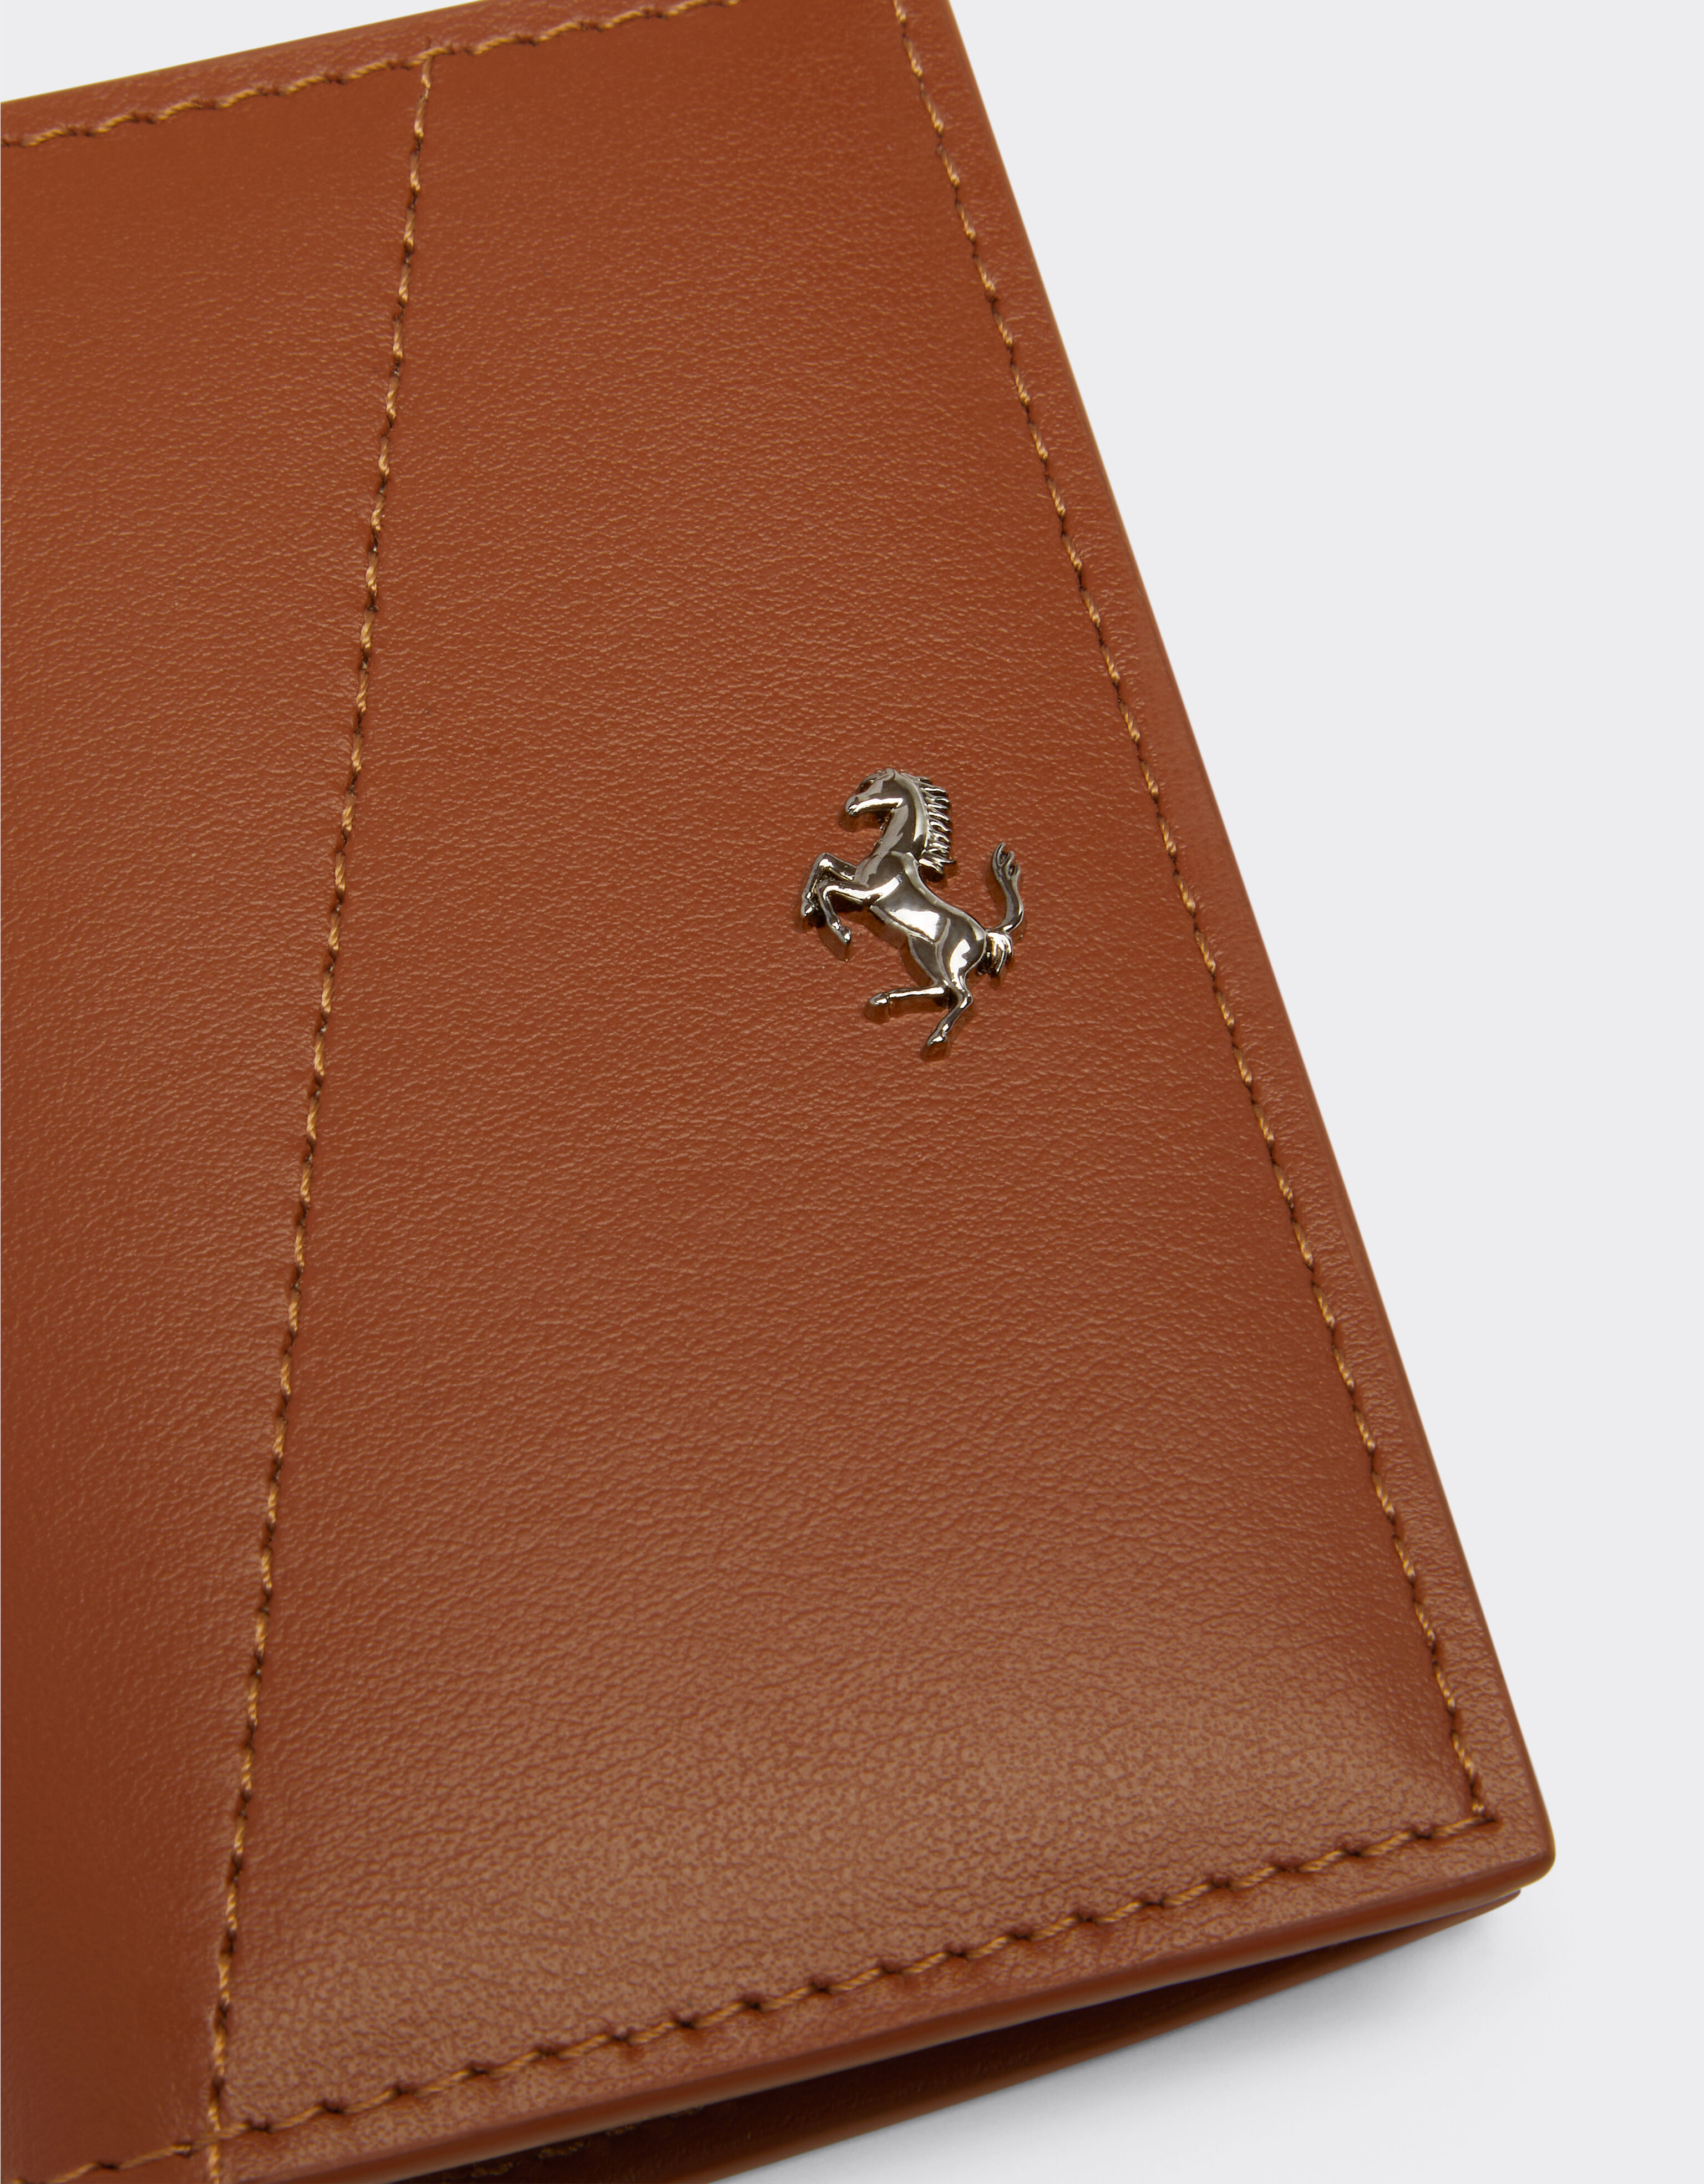 Ferrari Foldable card holder in smooth leather Hide 20616f